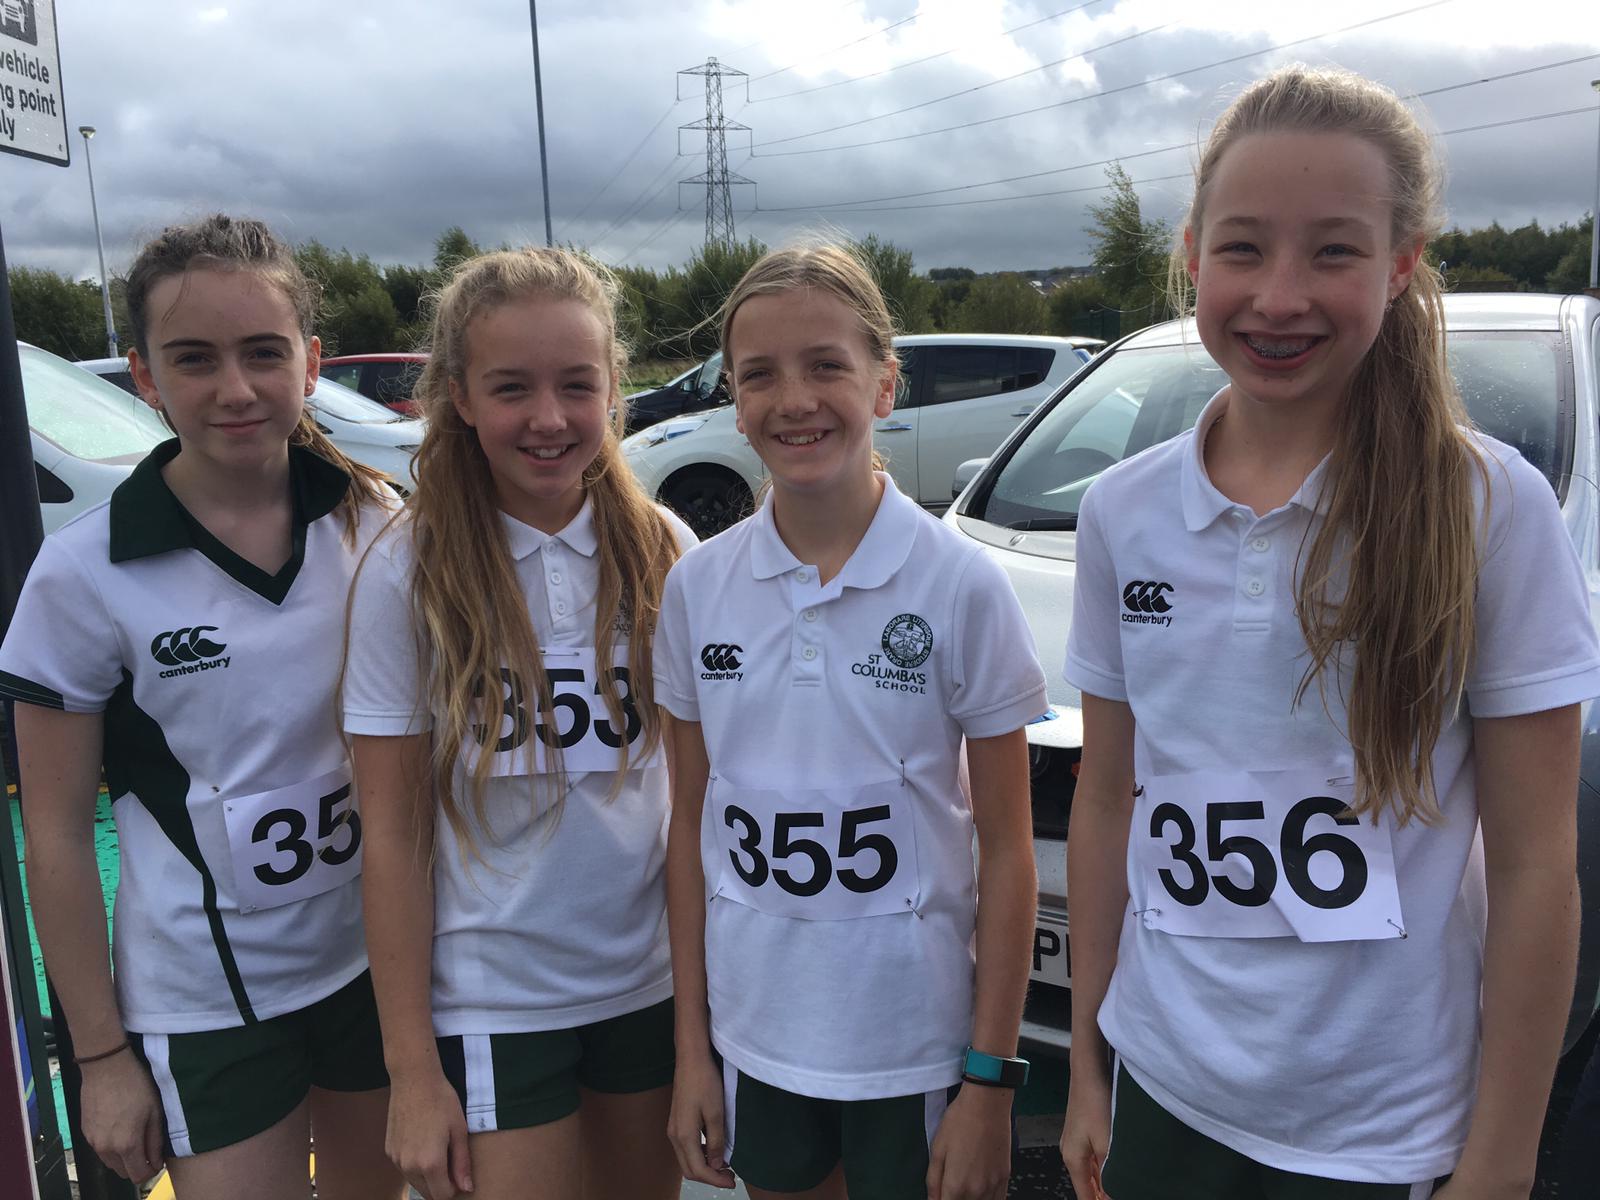 St Columba's Pupils Compete in SSAA Road Race